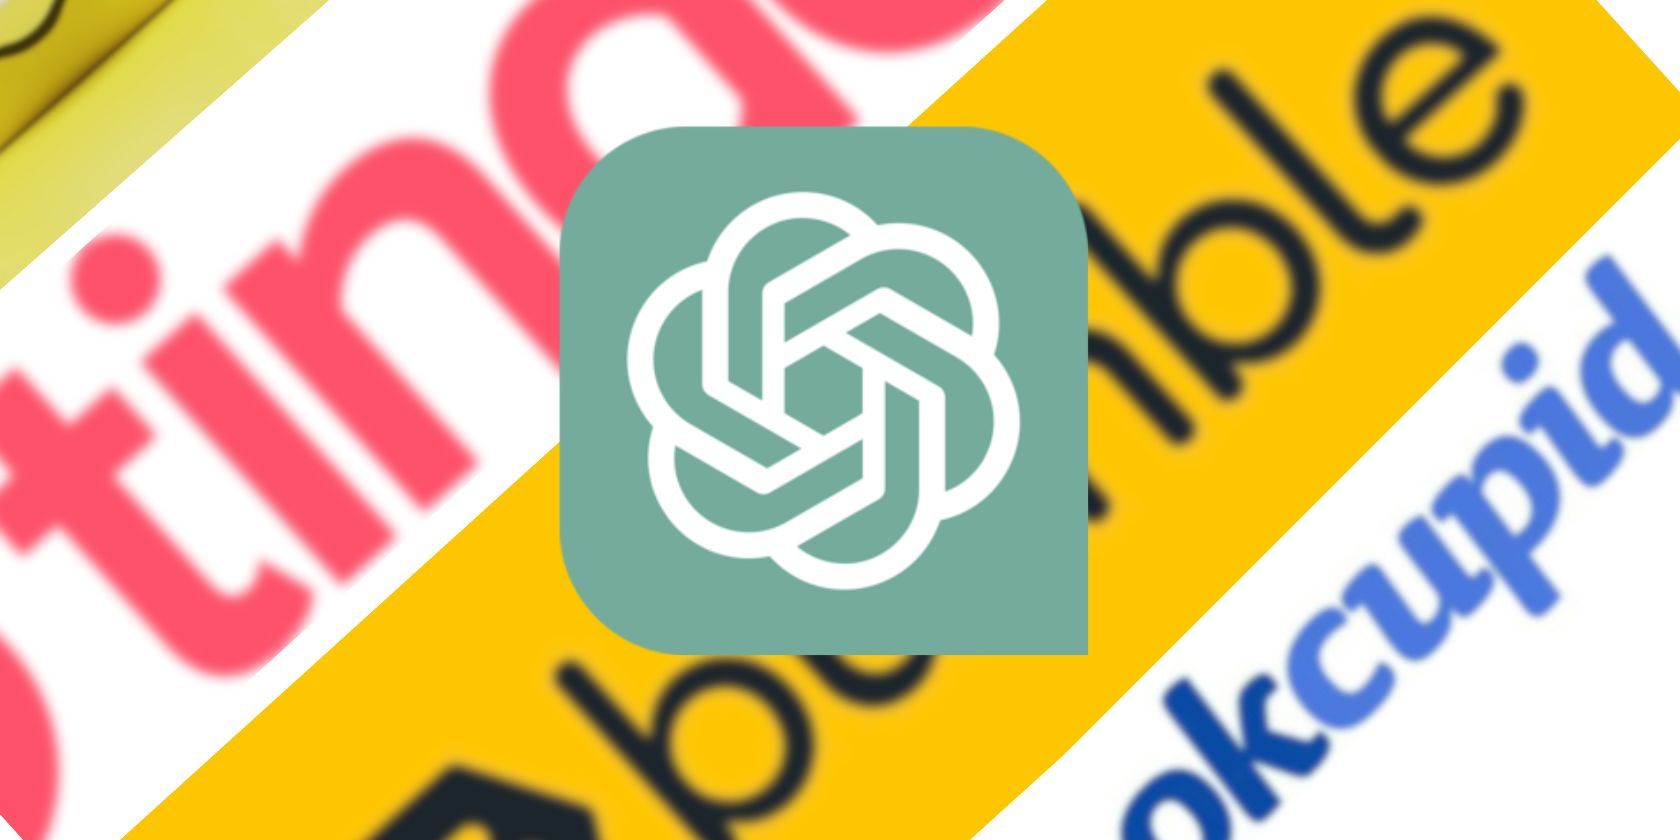 ChatGPT Logo on top of Blurred Dating App Logos